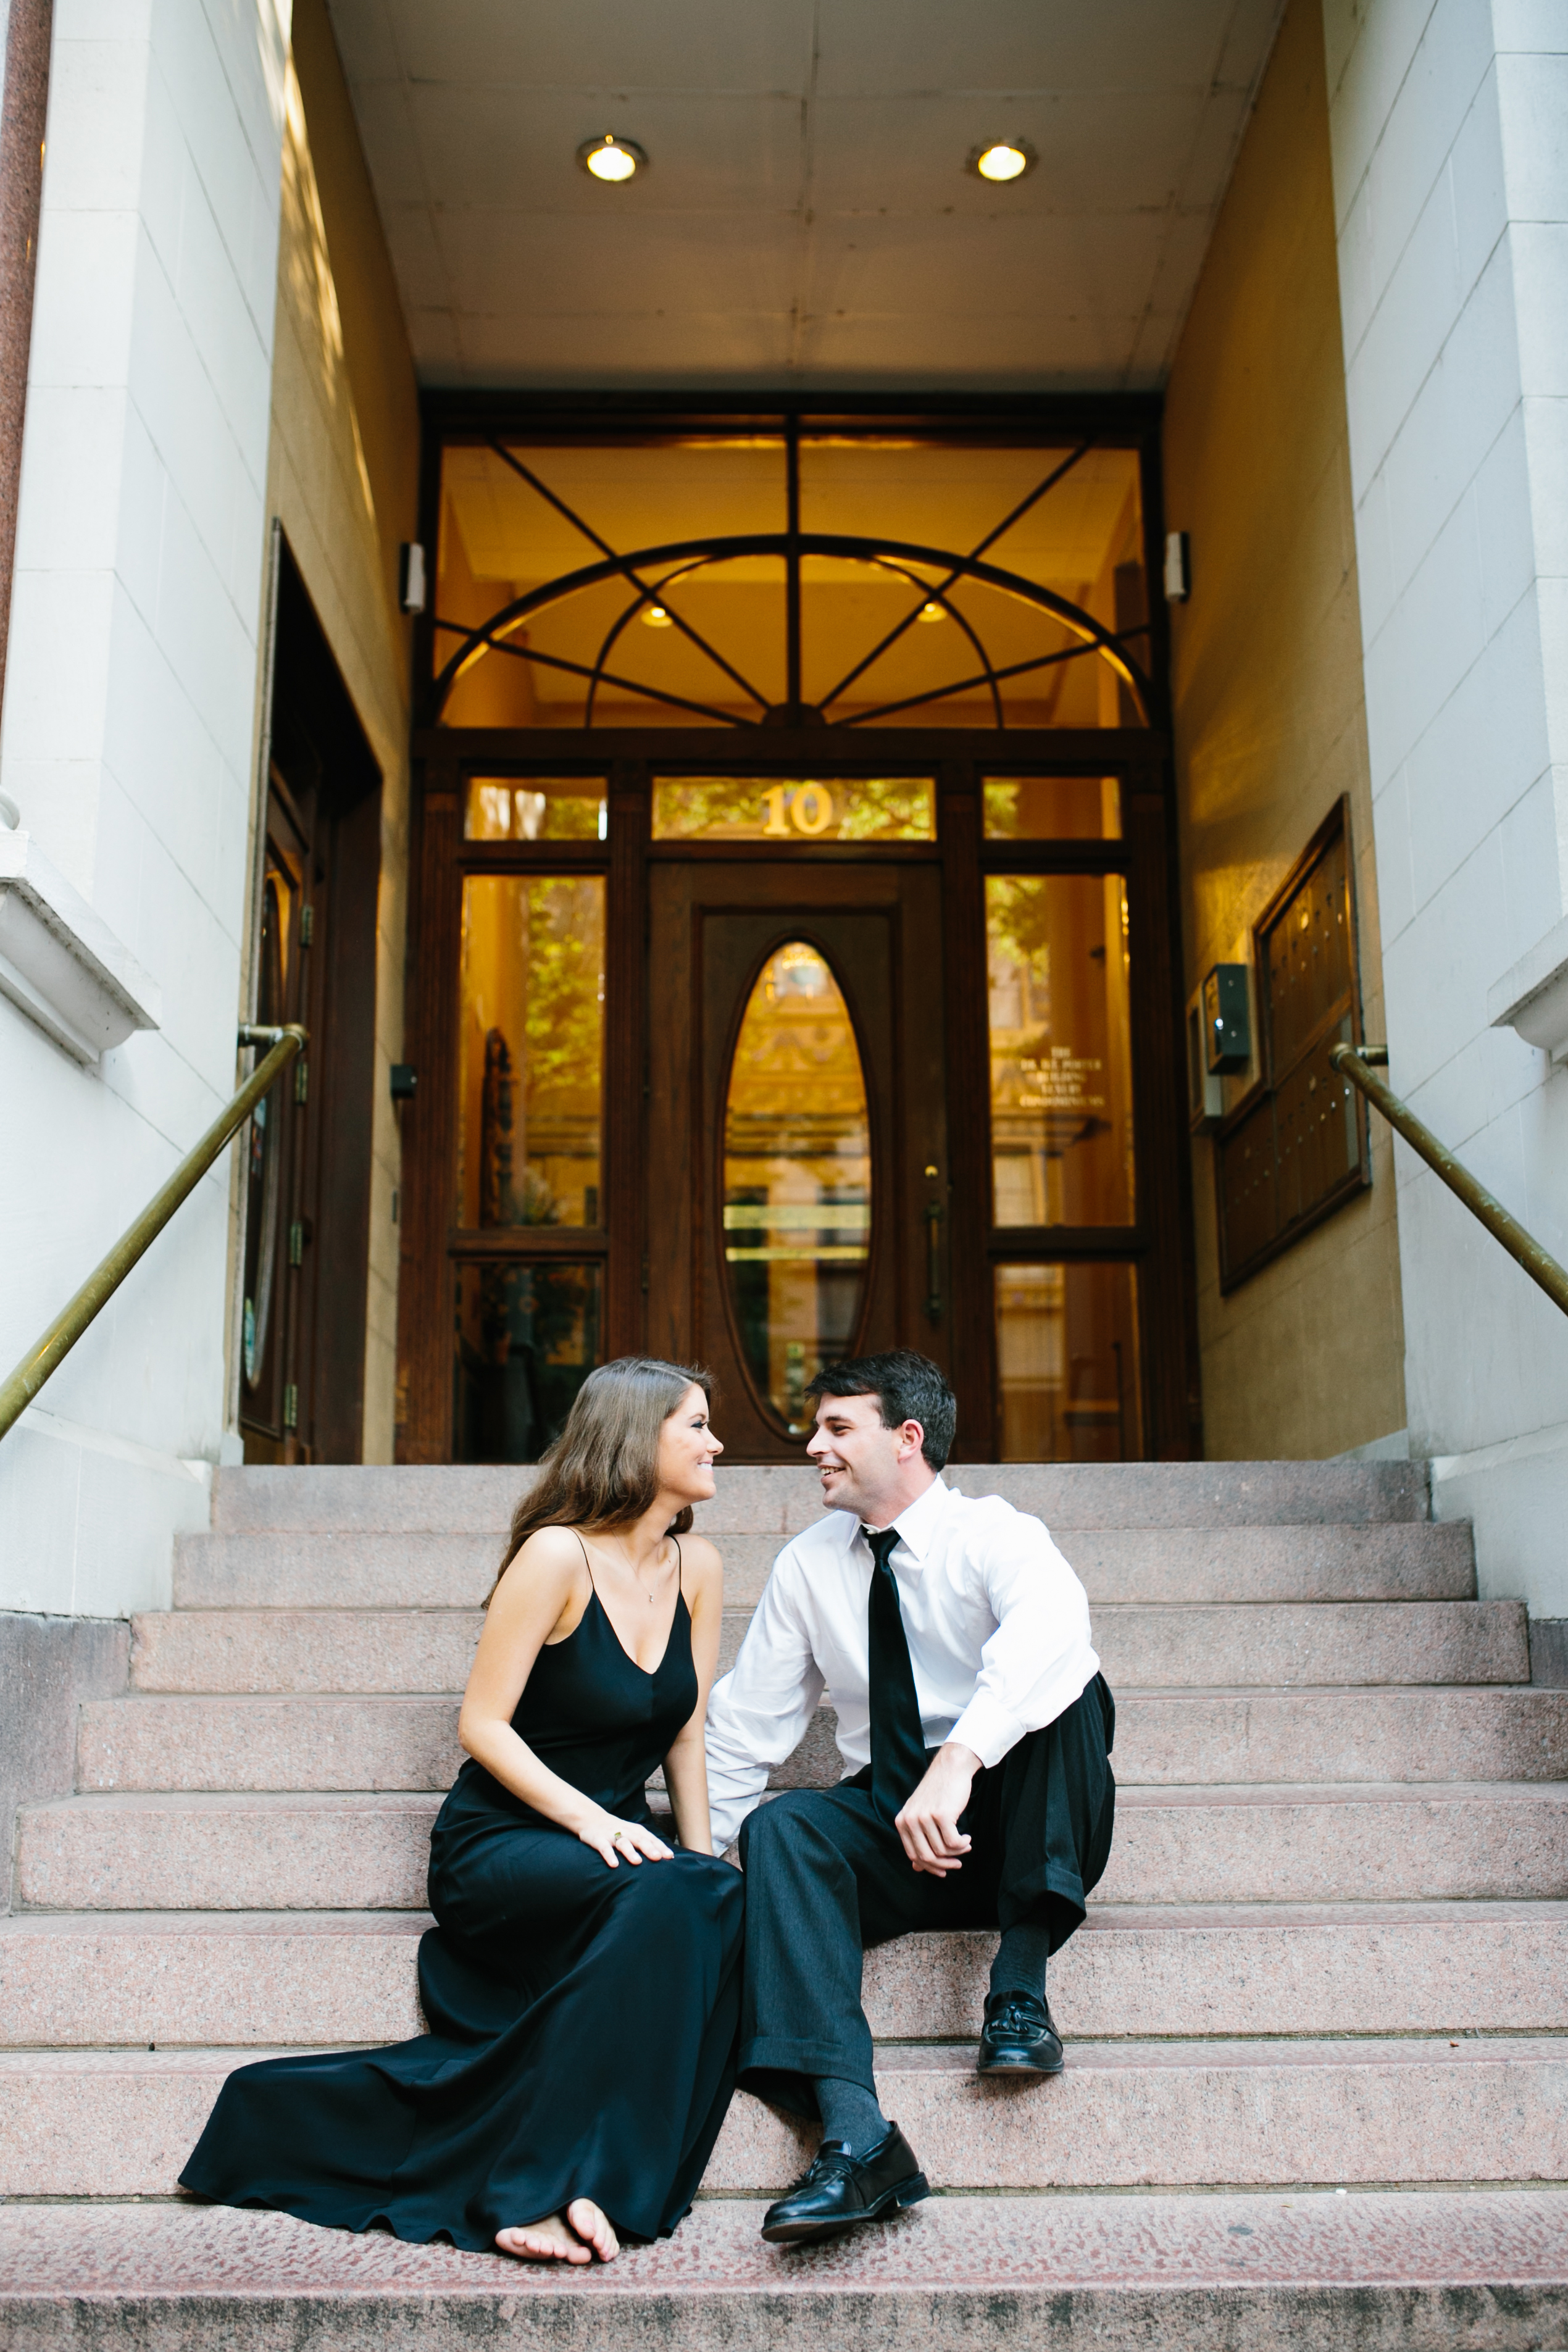 Urban engagements session. Downtown engagement session. Intimate wedding photos. Emotional raw engagement photos.